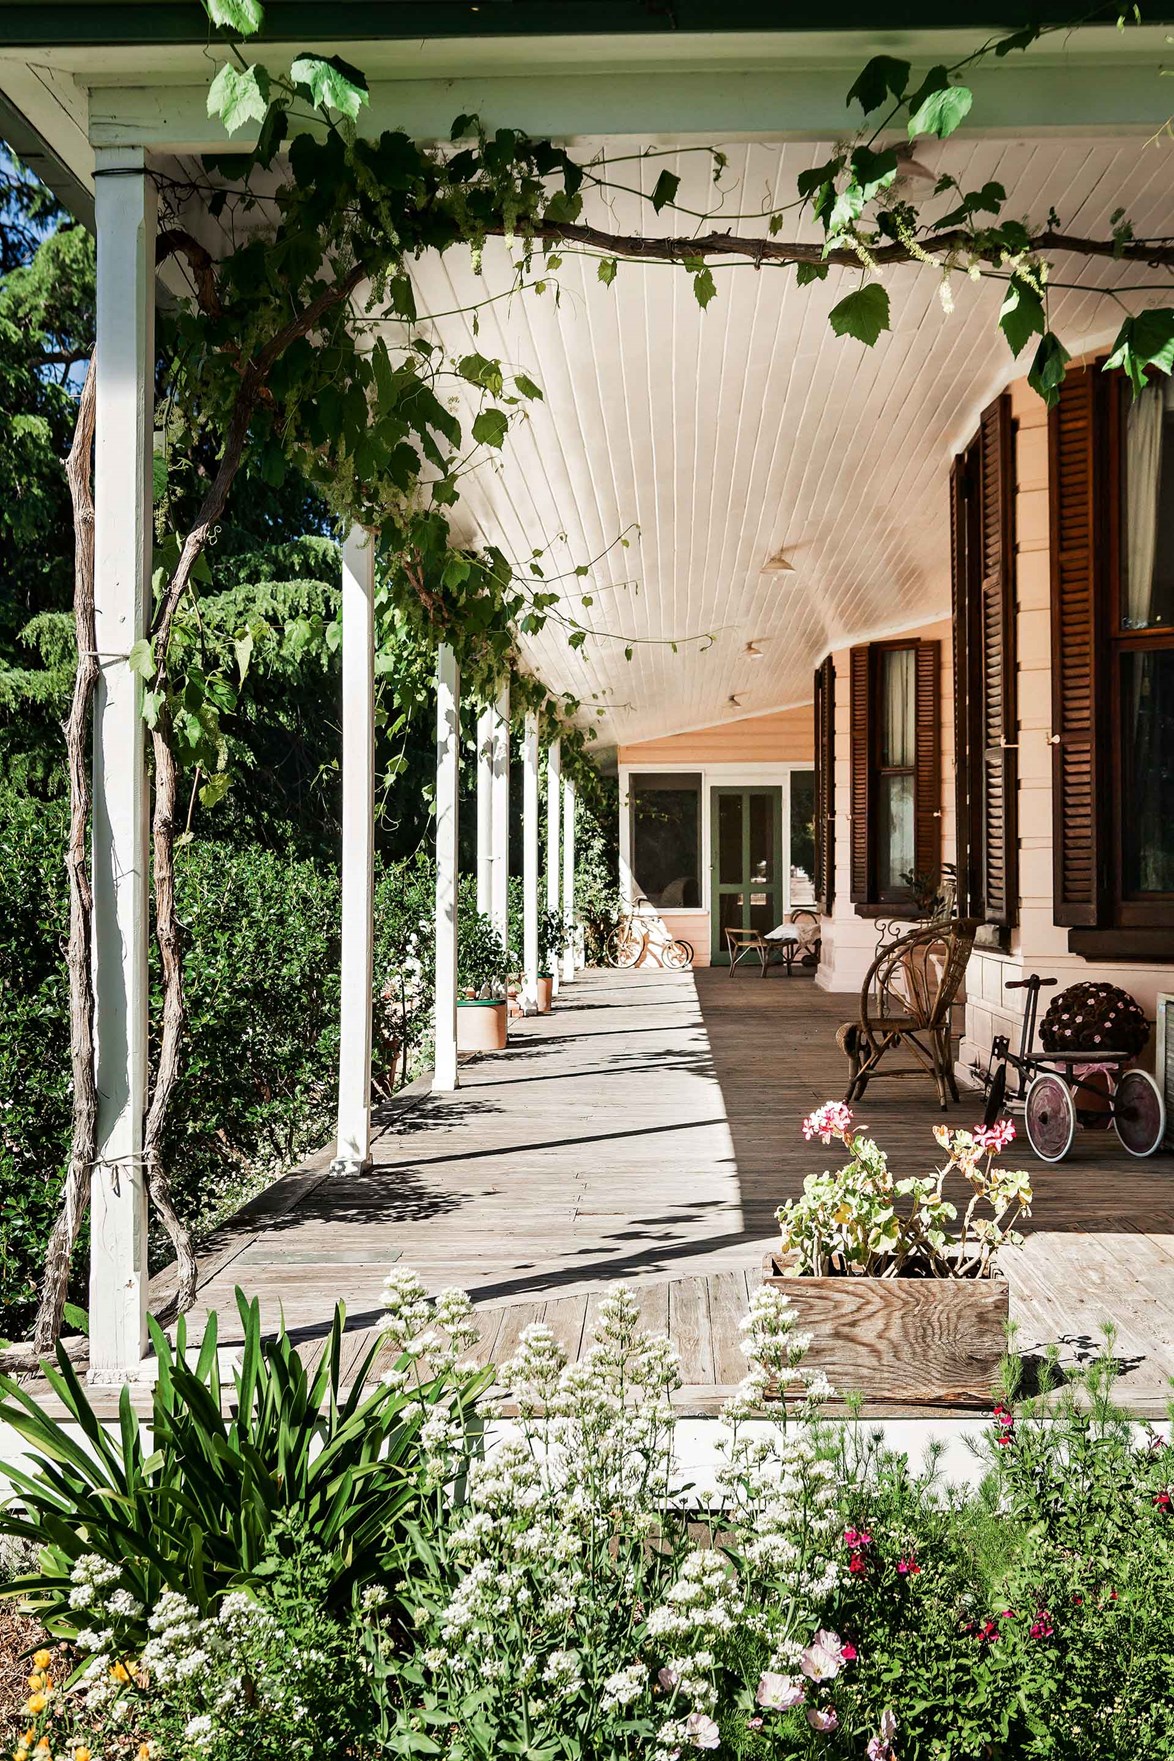 An ornamental grape vine wraps around the verandah of a [heritage farmhouse in northern NSW](https://www.homestolove.com.au/cottage-garden-20688|target="_blank"). The front bed is planted with escallonia, while on the side is a mix of agapanthus, salvia and valerian. 